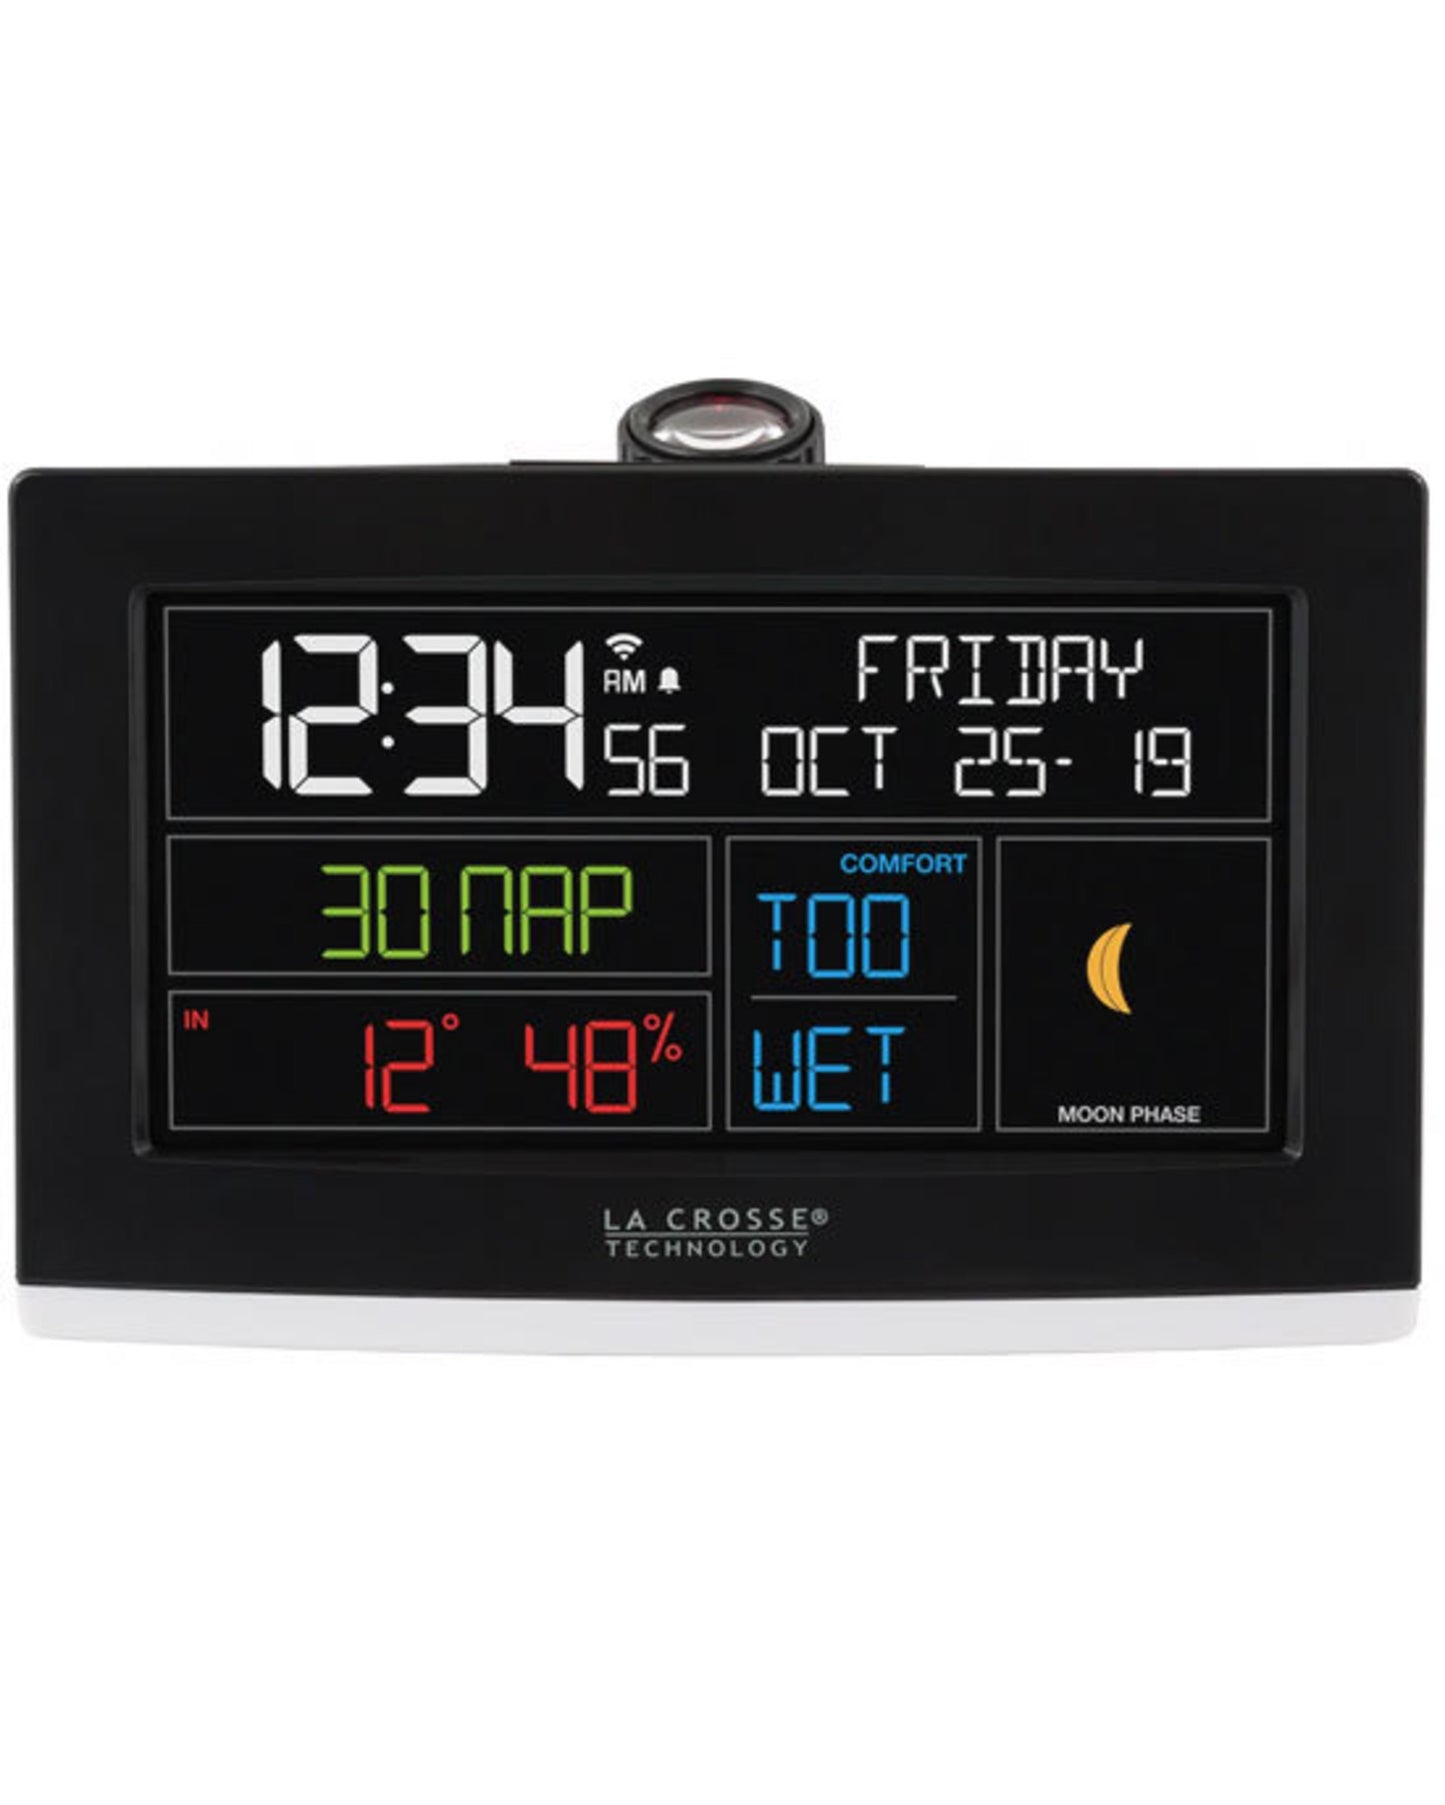 C82929 WIFI PROJECTION ALARM CLOCK WITH ACCUWEATHER